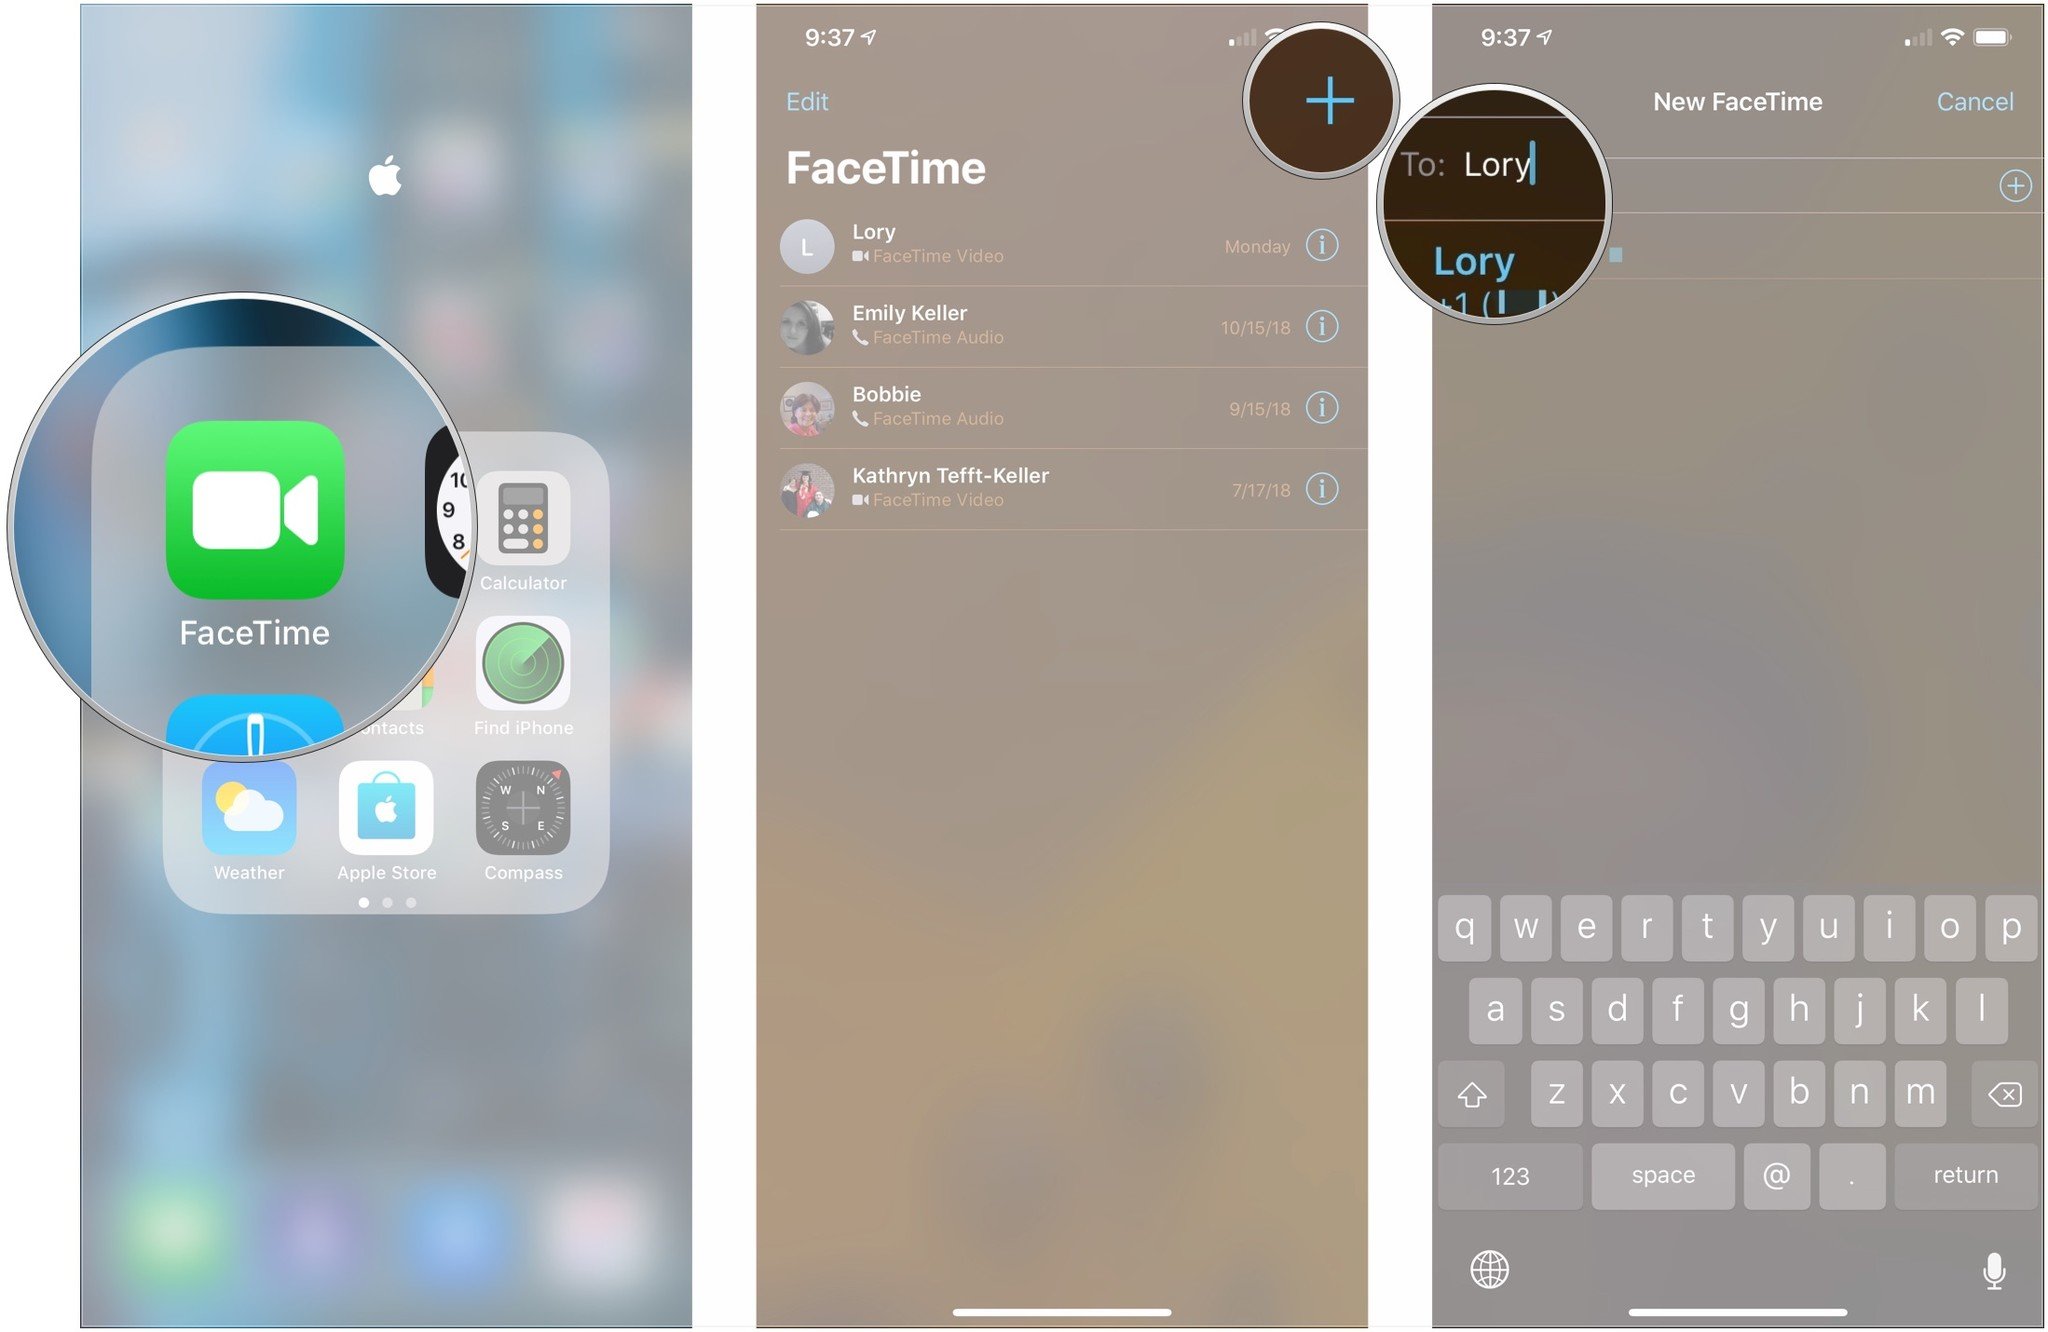 How to make group FaceTime calls: Open FaceTime, tap + button, enter name or number